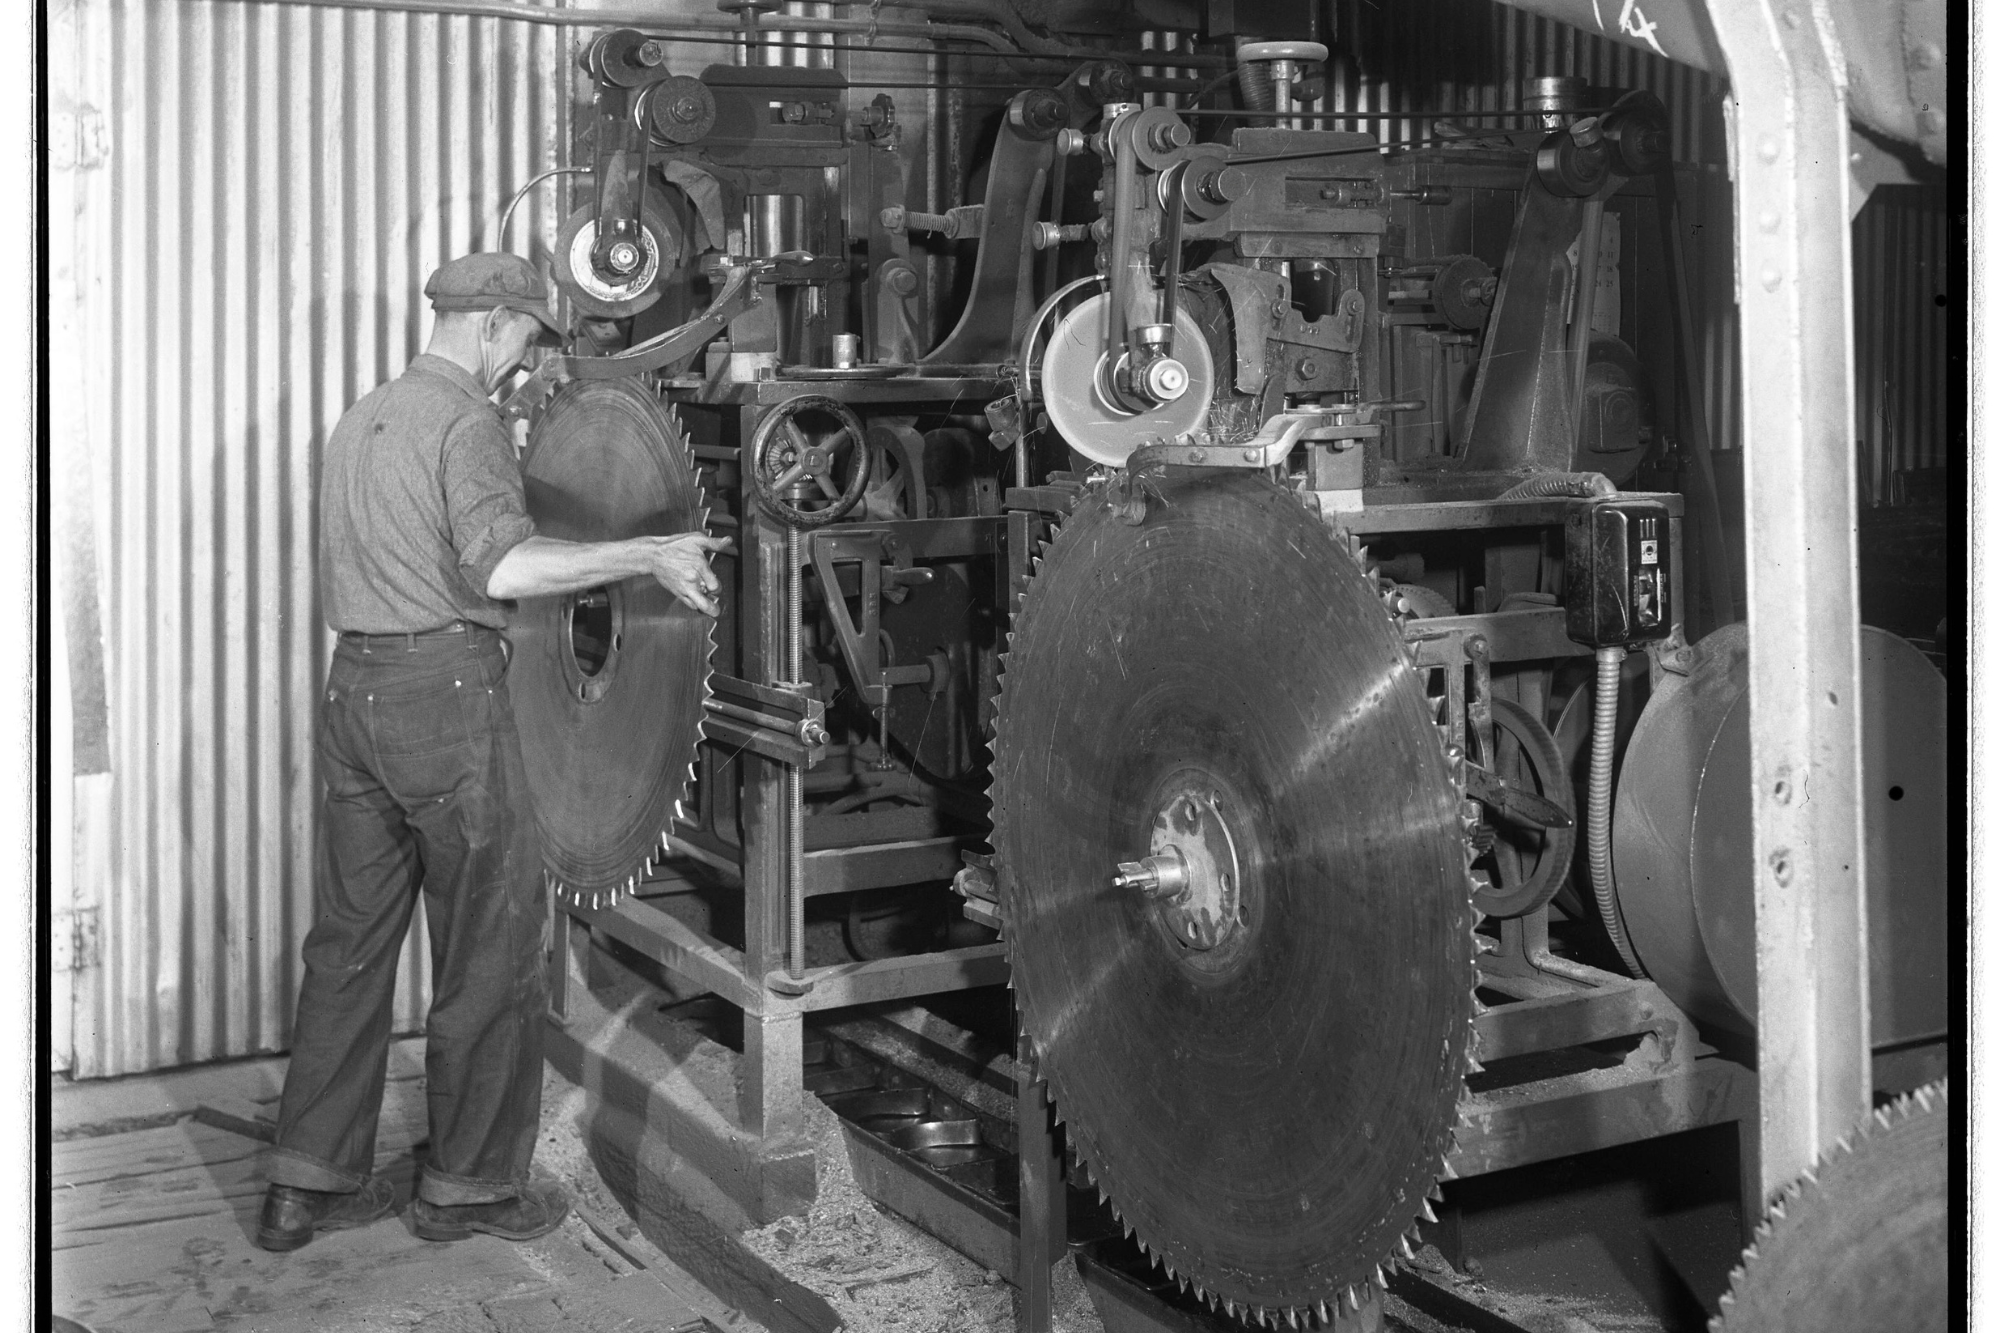 Working replacing saw blades at the Dow Sawmill